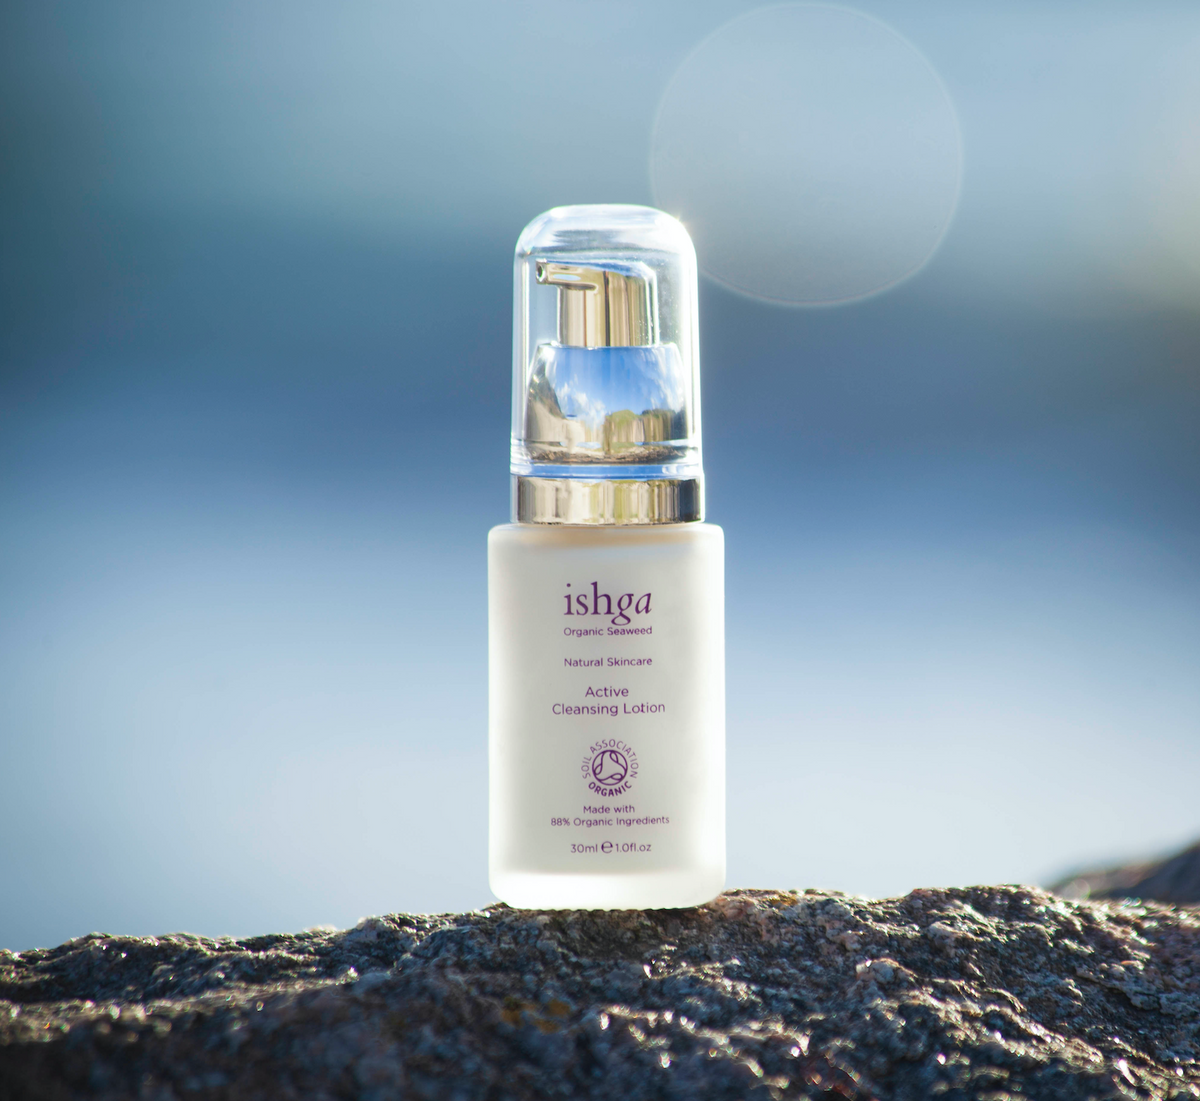 Small bottle of ishga Active Cleansing Lotion on a rock outside